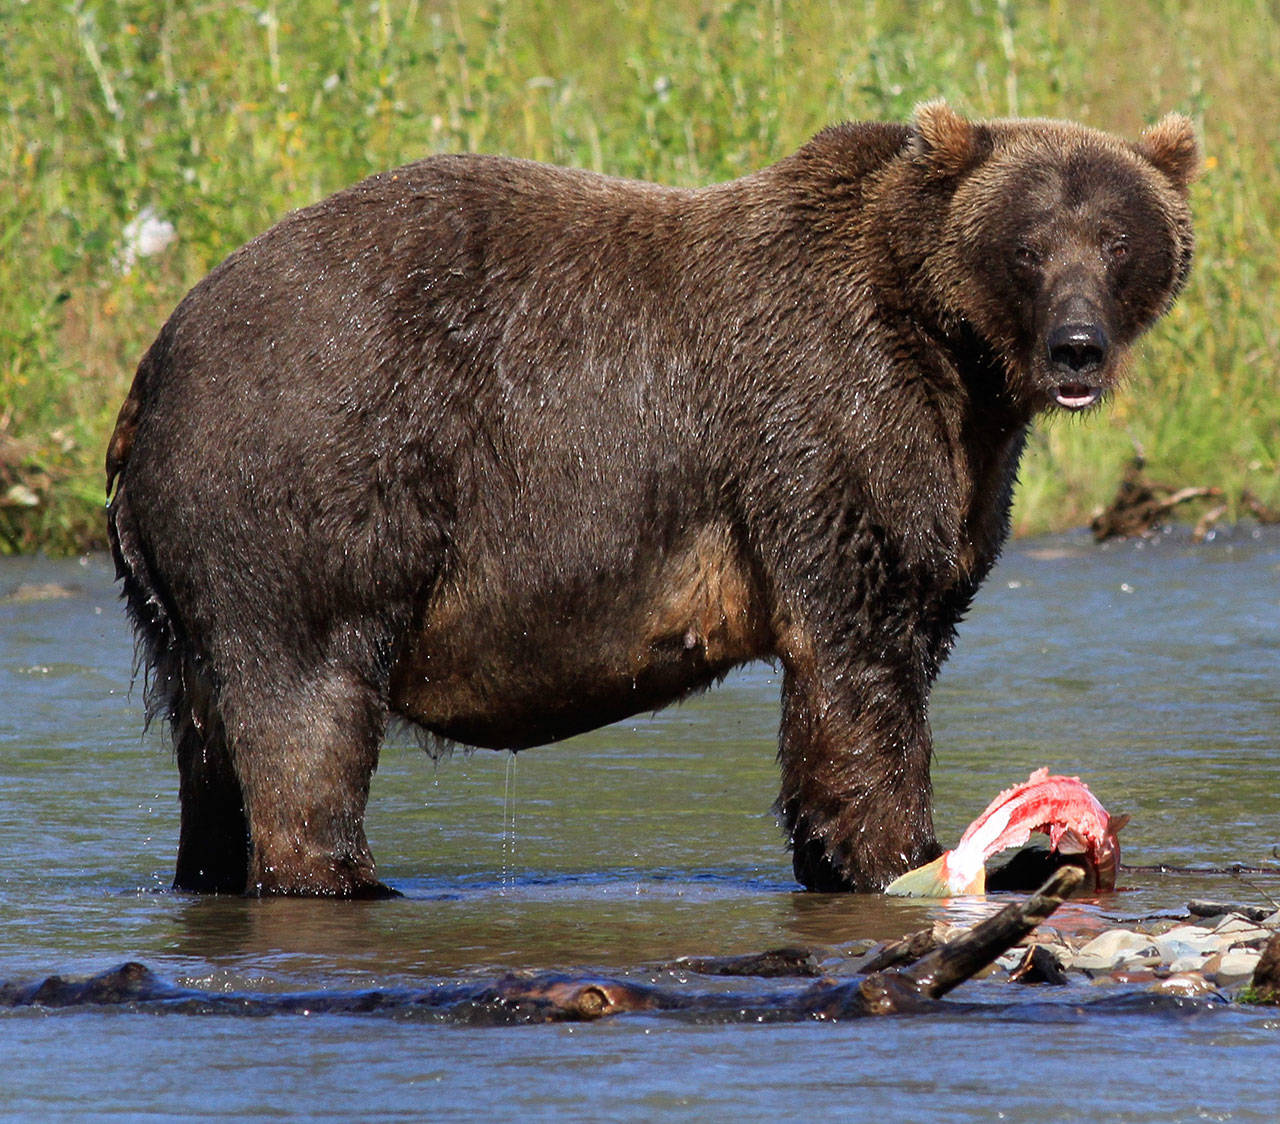 Mike Benbow / For The Herald A grizzly bear looks up from his salmon at Katmai National Park in Alaska.